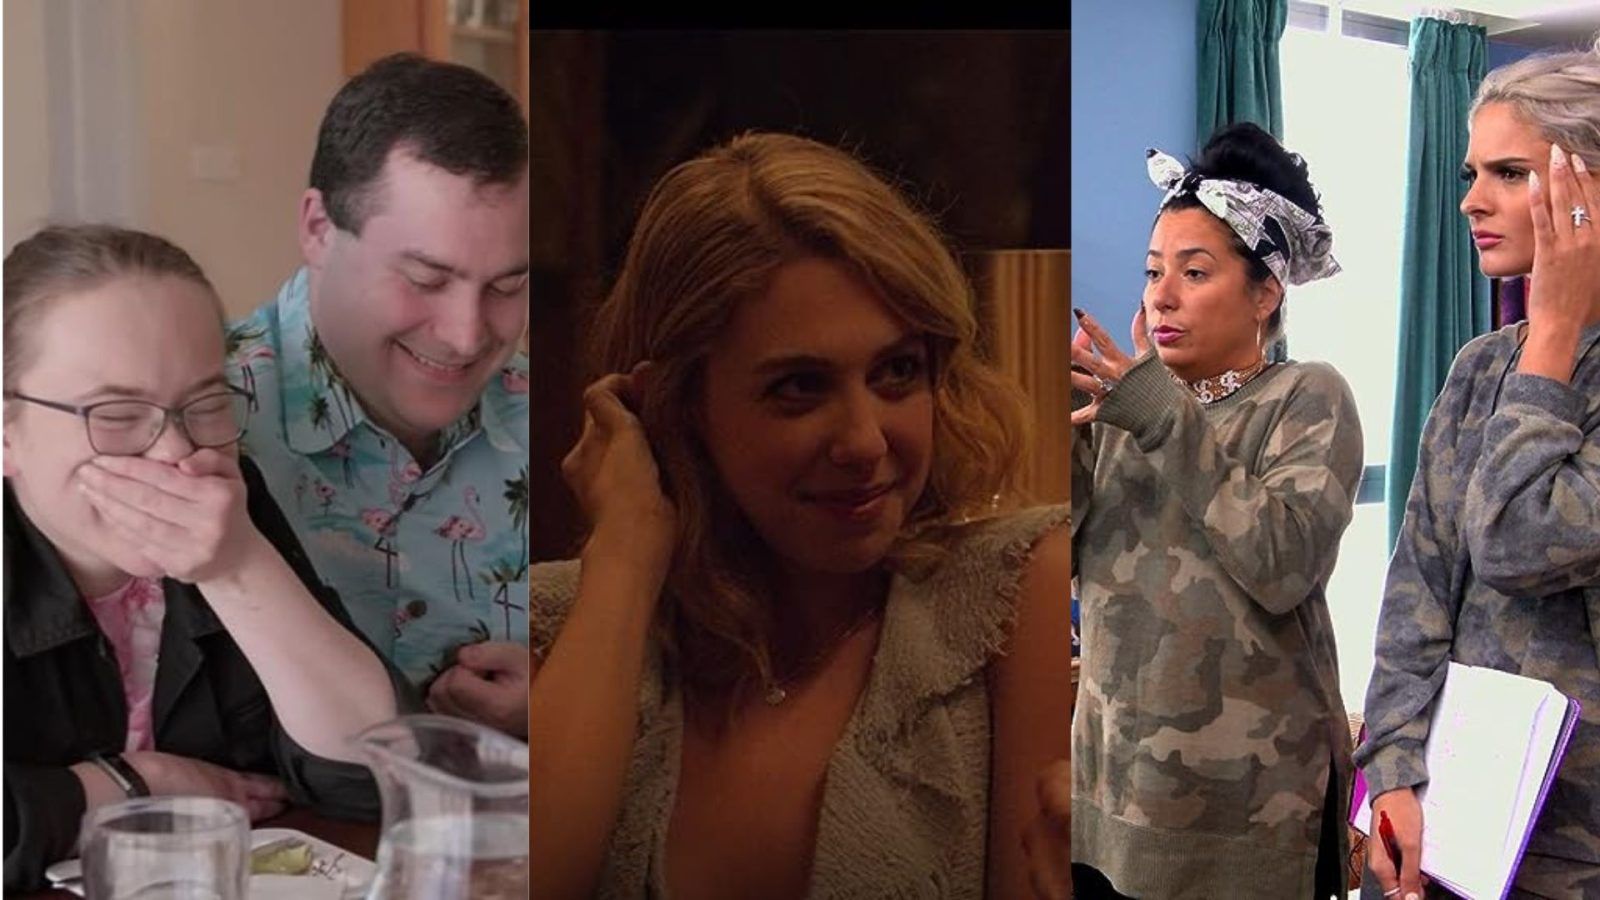 Best Dating Shows on Netflix